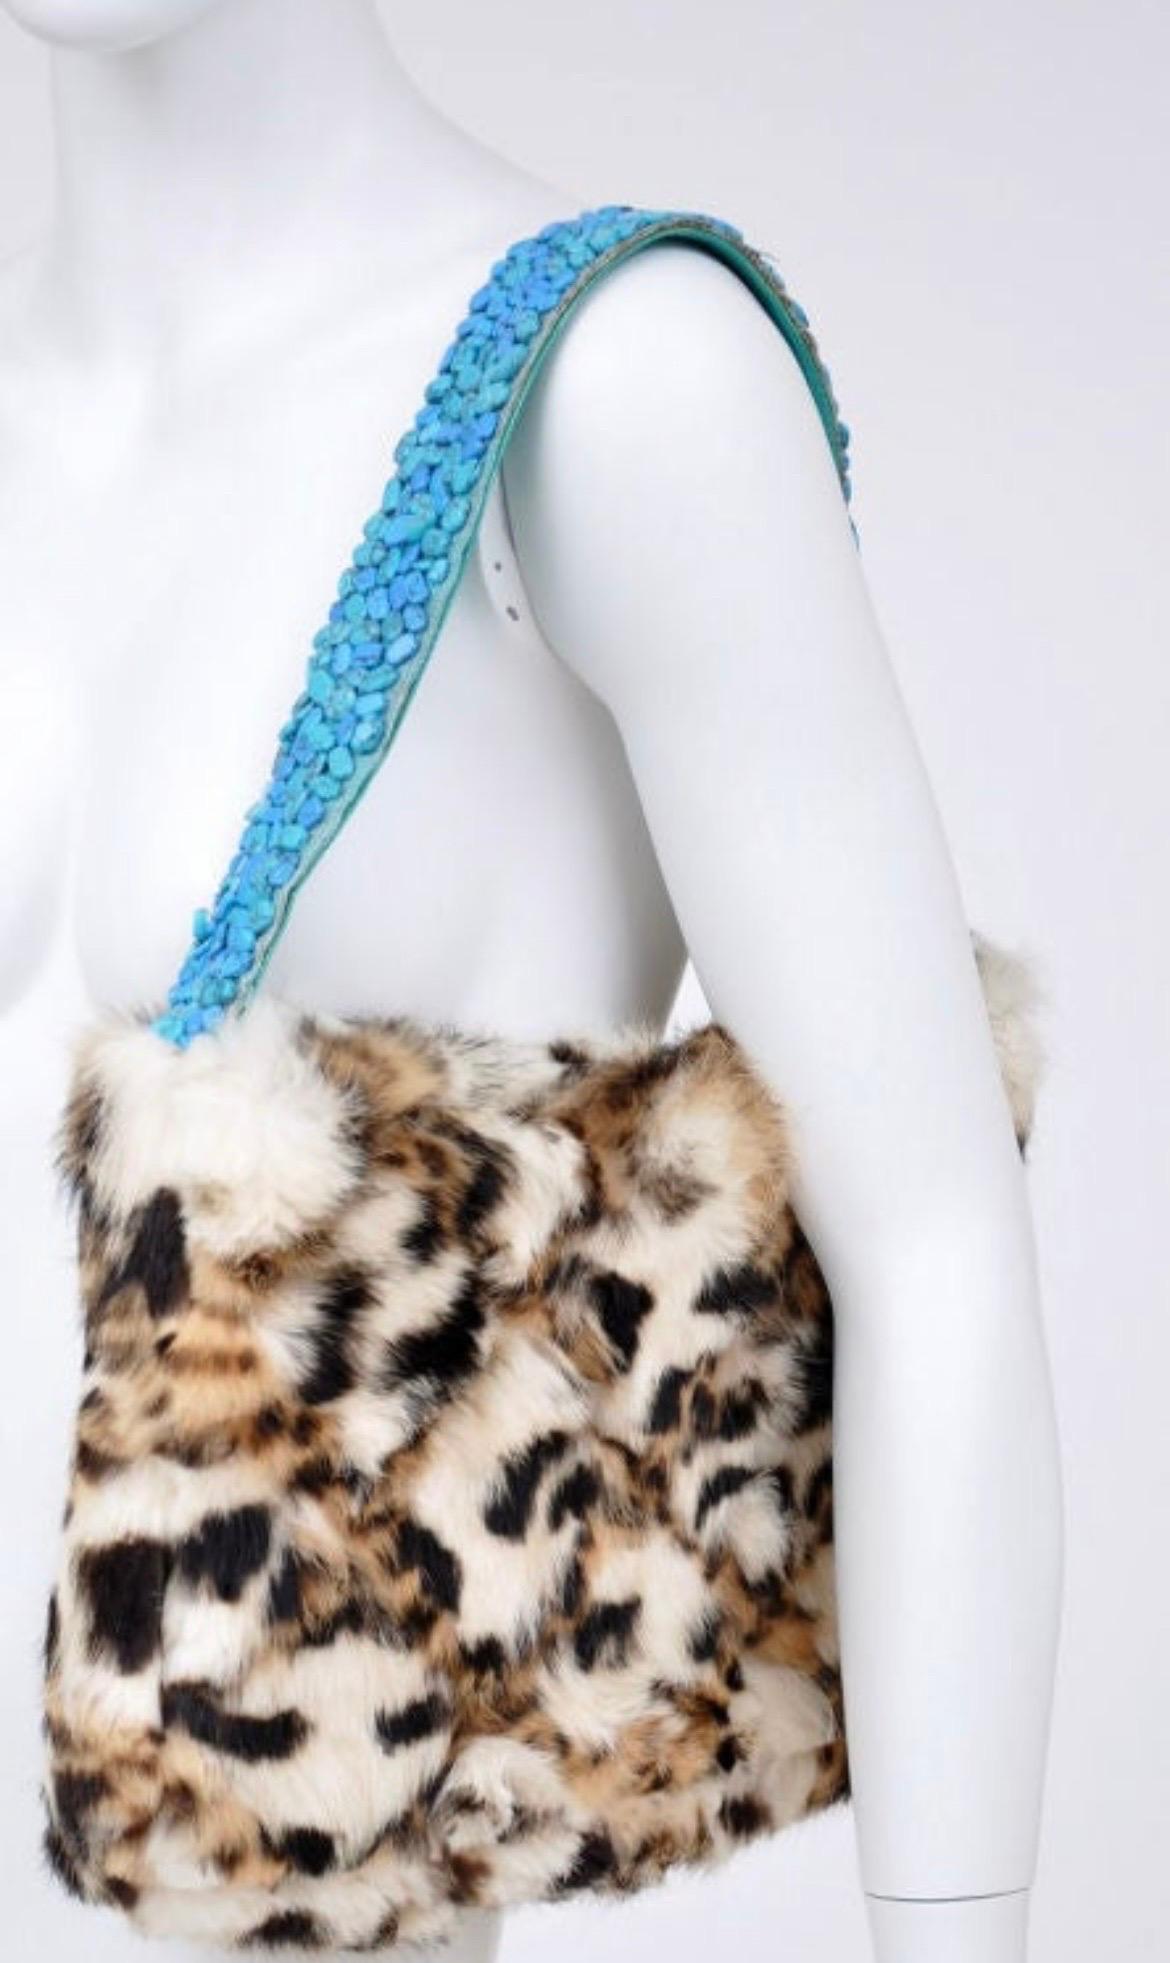 1999 Rare Gianni Versace Runway Animal print Fur Handbag with Turquoise Stones In New Condition For Sale In Montgomery, TX